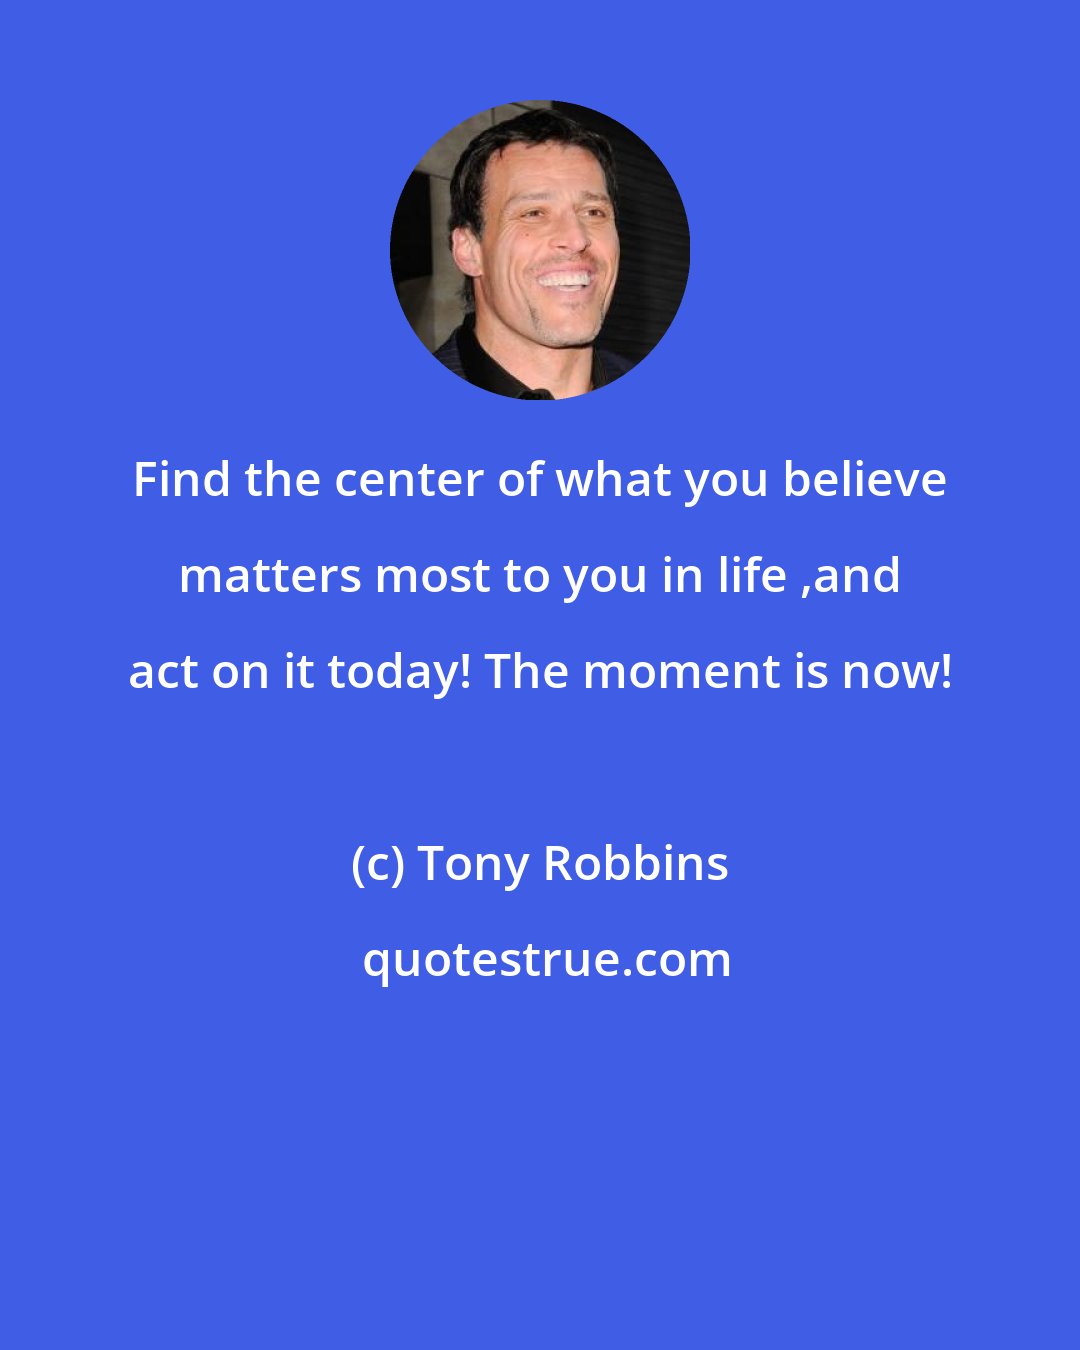 Tony Robbins: Find the center of what you believe matters most to you in life ,and act on it today! The moment is now!